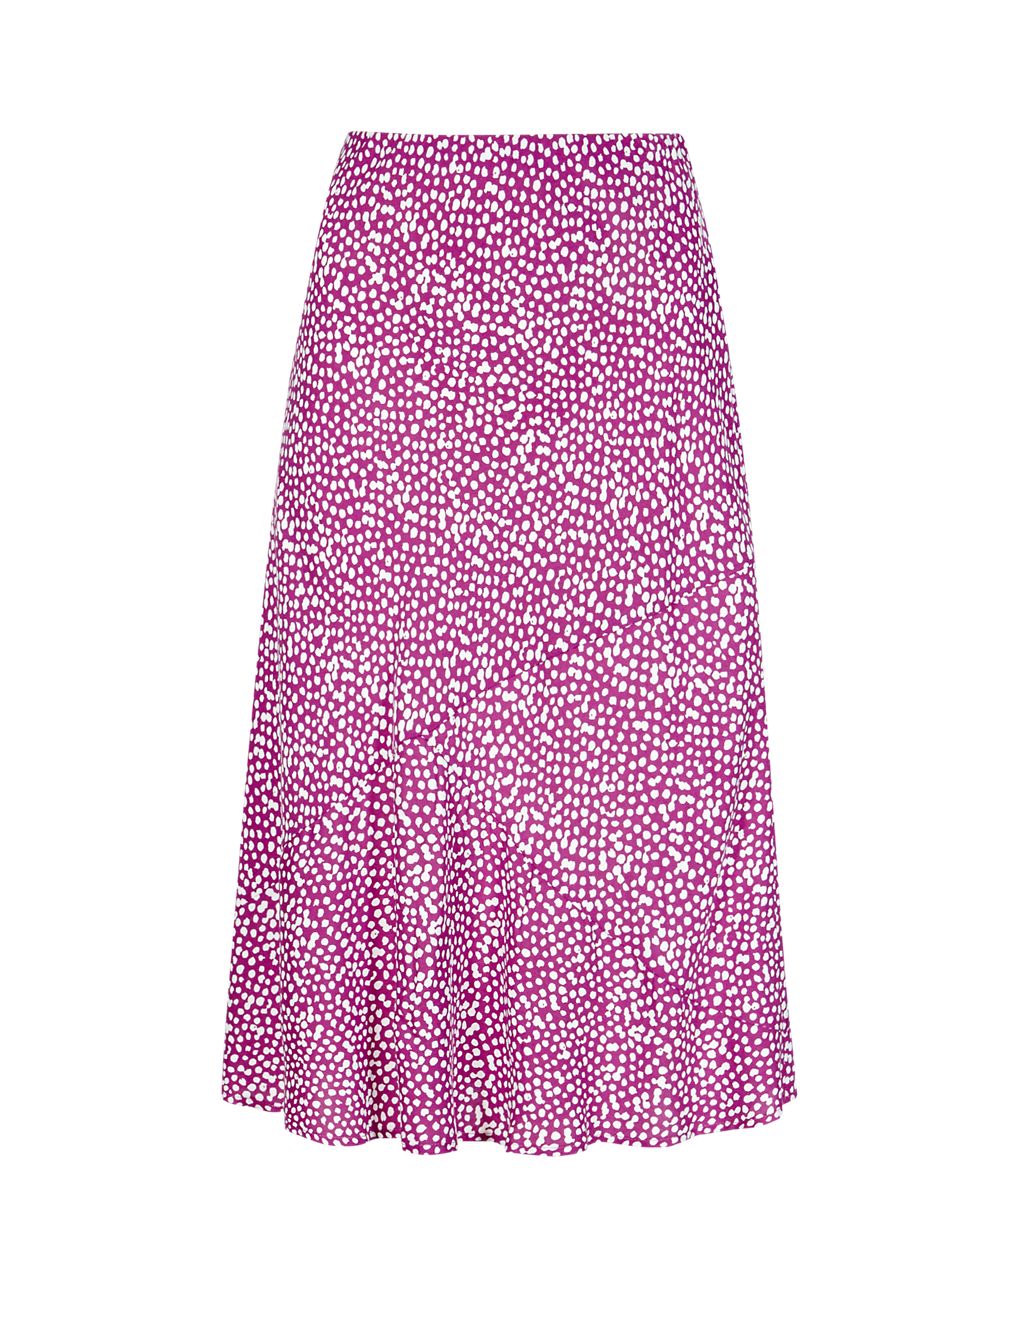 Ditsy Spotted Calf Length Skirt 1 of 3